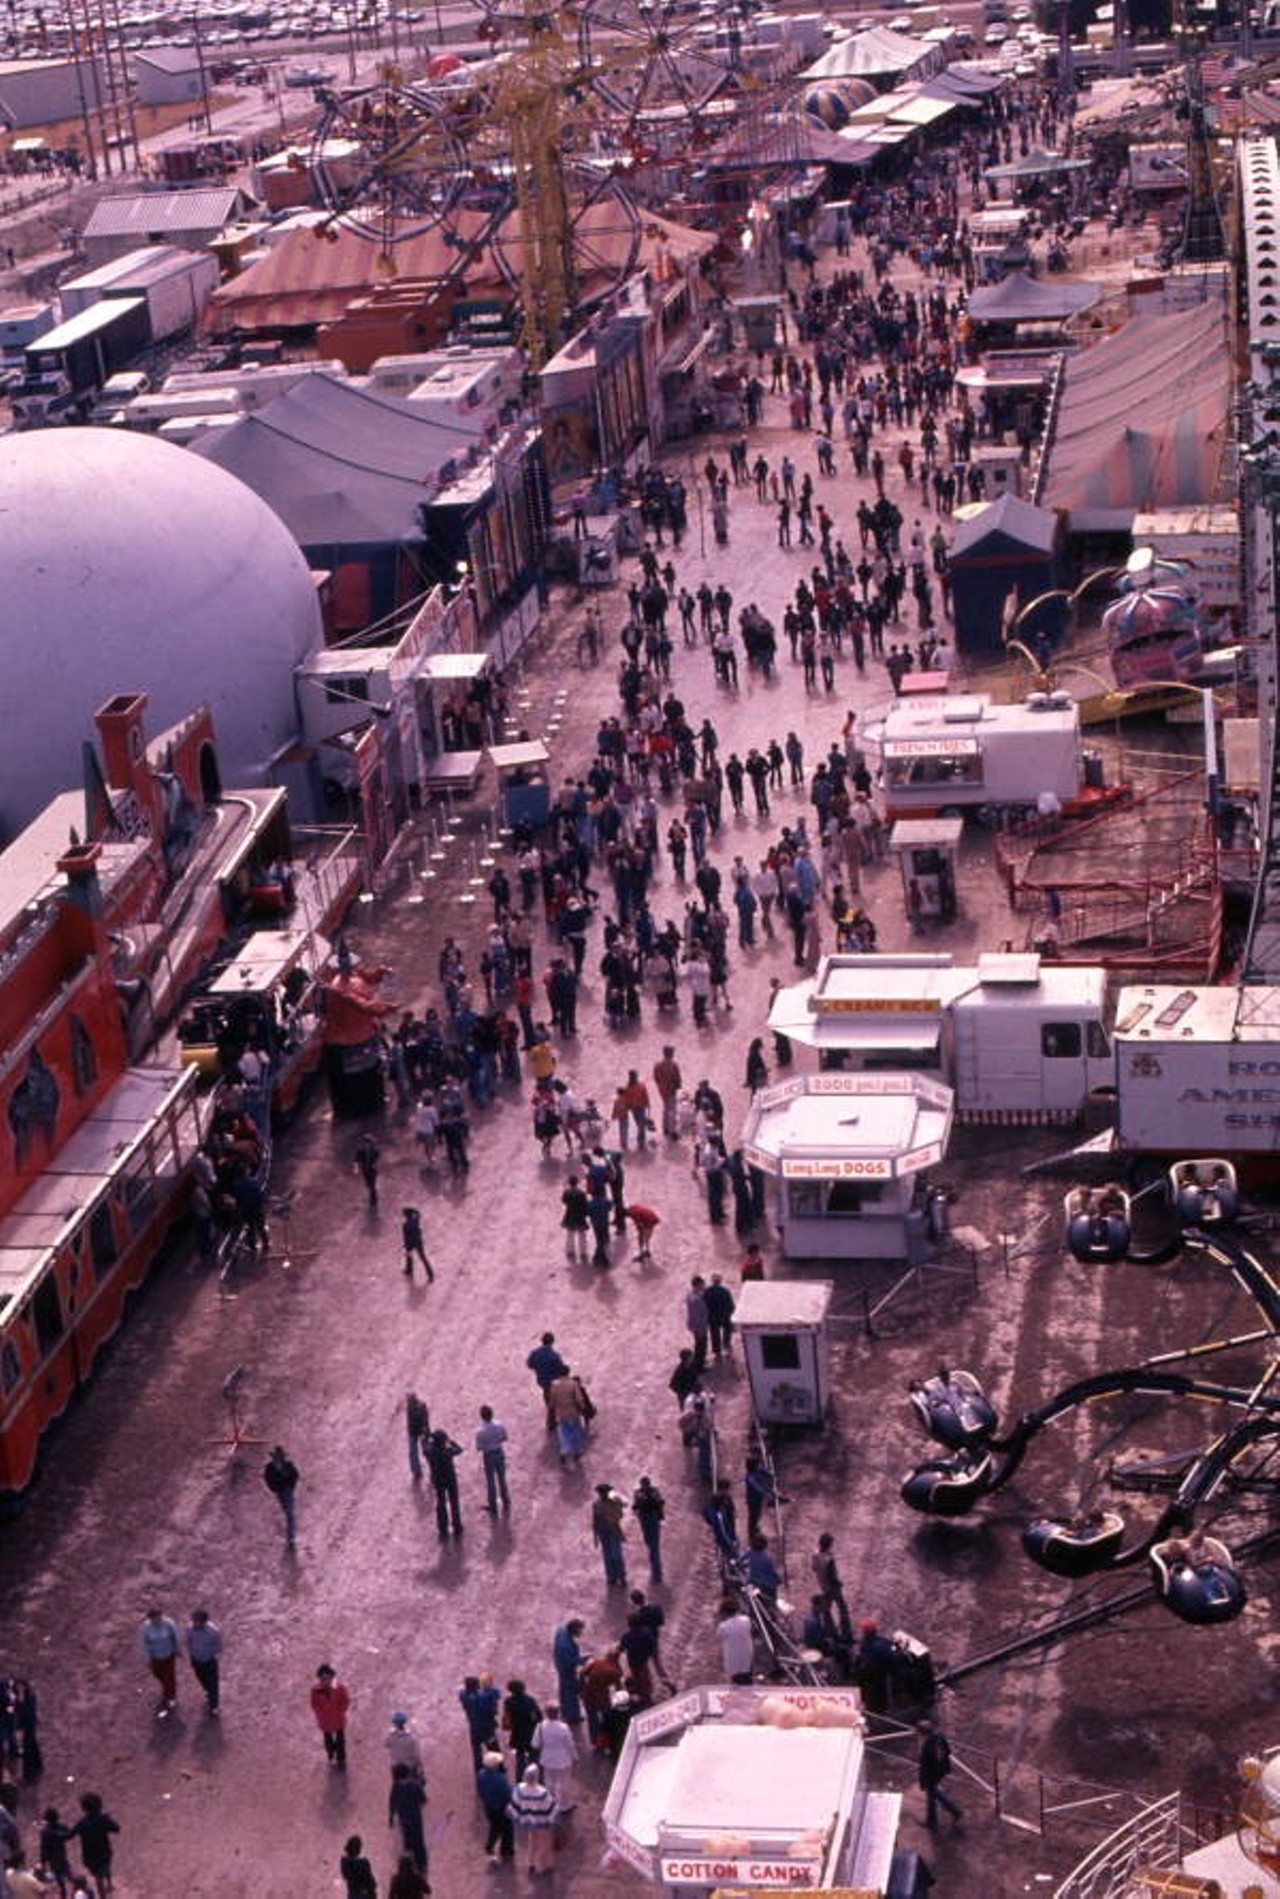 Bird's eye view overlooking the 1977 Florida State Fair in Tampa.